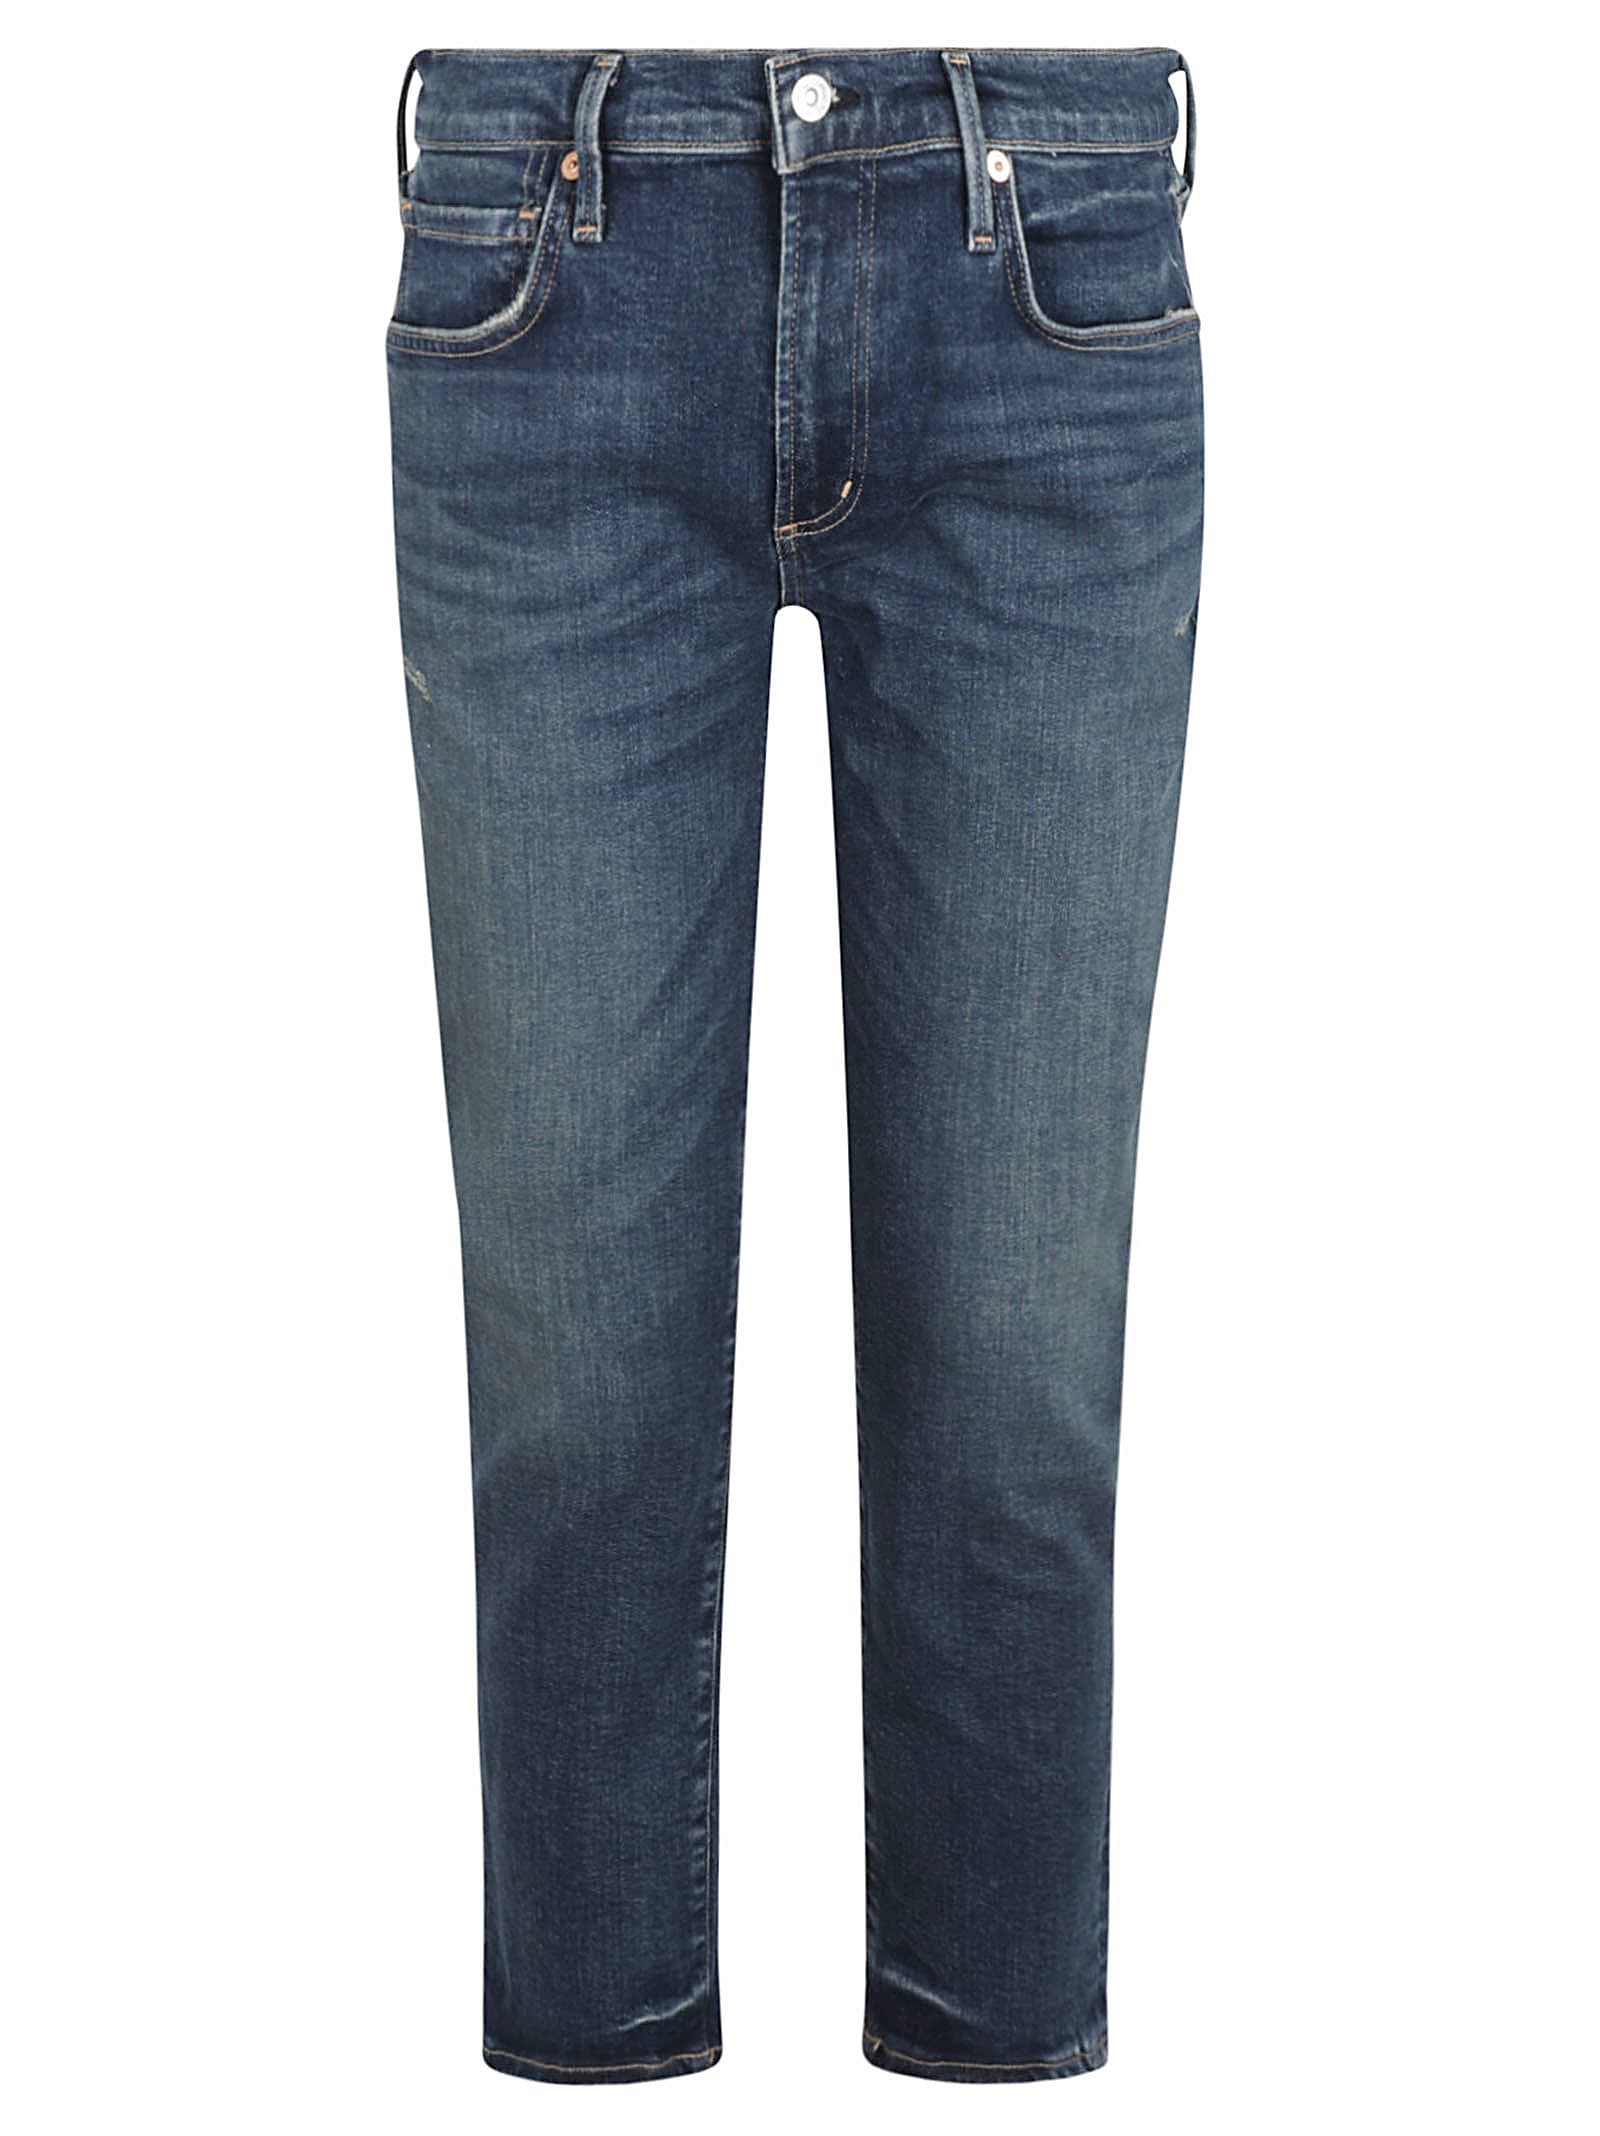 Citizens of Humanity Ella Mid Rise Crop Jeans